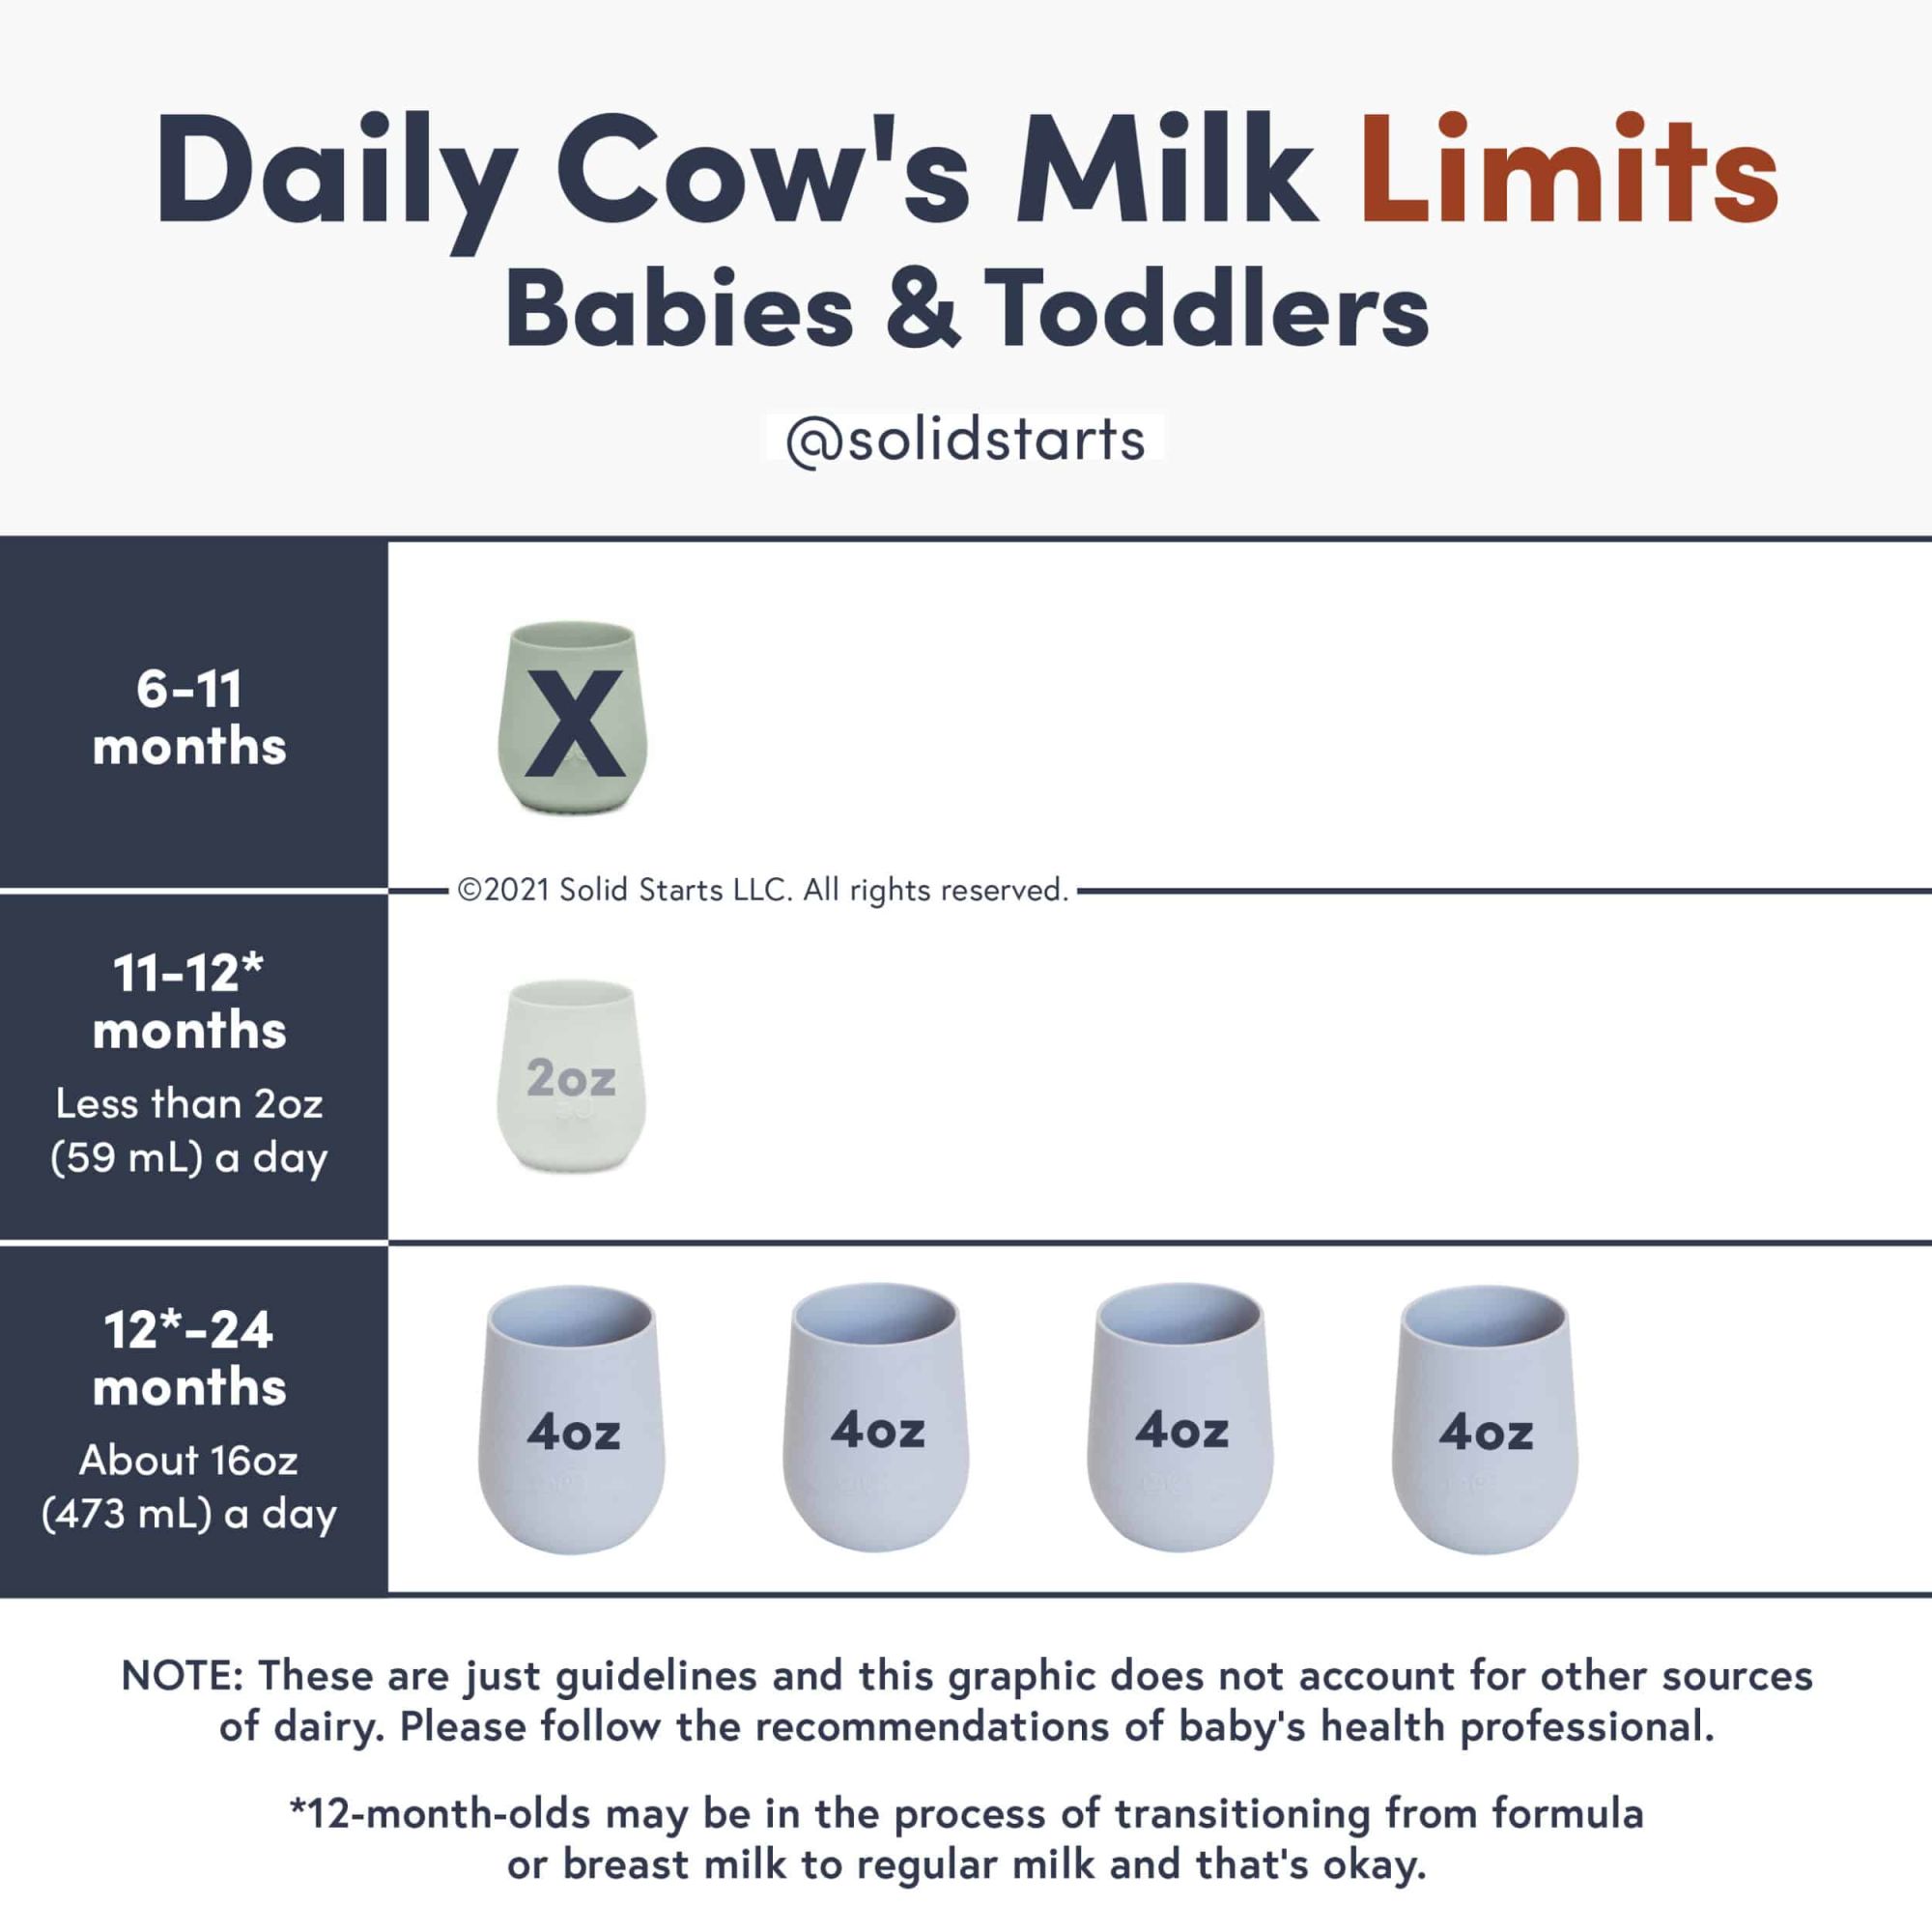 https://images.ctfassets.net/ruek9xr8ihvu/2mIDe1bEQcjkJso771n5p/0af398014d2586cefed240d7b9ba36a7/Daily-Cows-Milk-Limits-for-Babies-and-Toddlers--scaled.jpg?w=2000&q=80